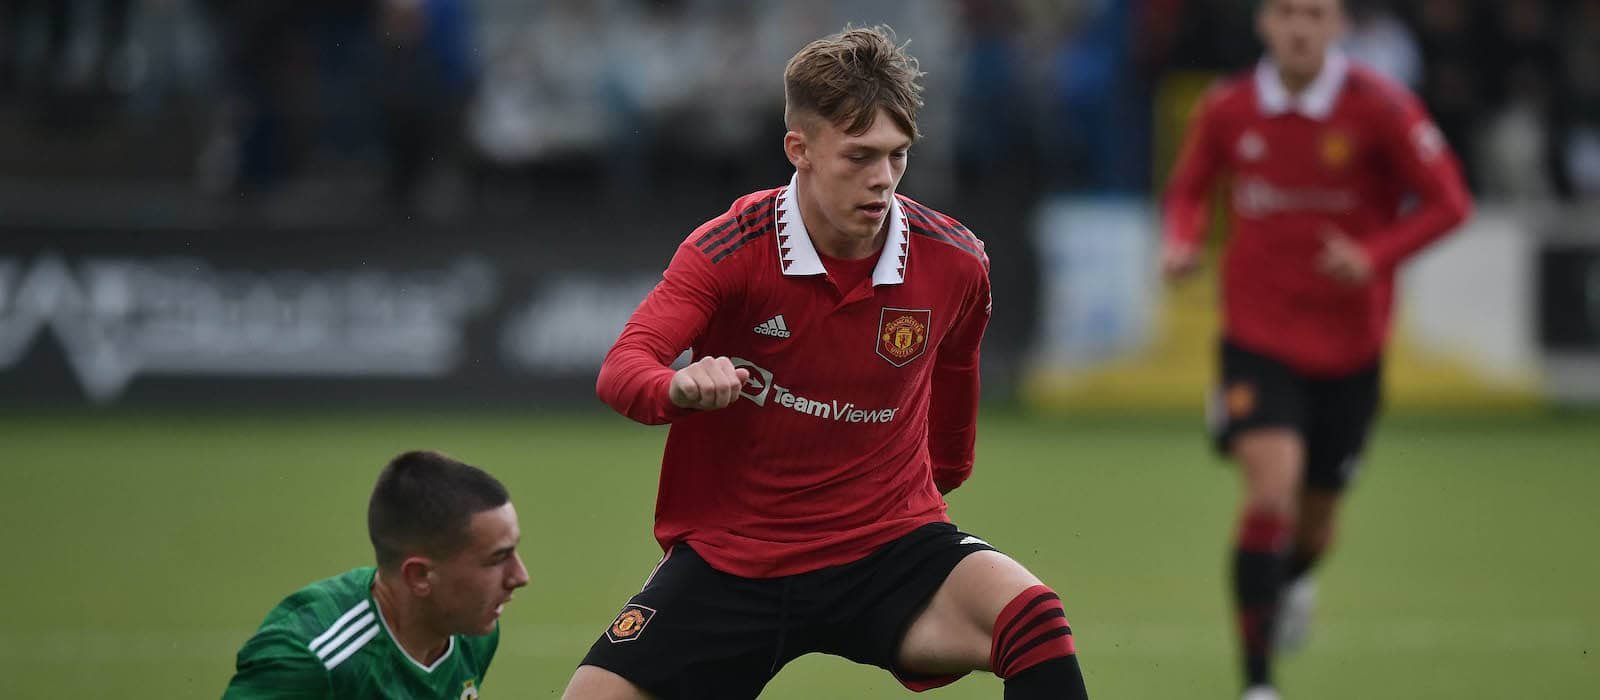 Man United academy agree unique loan moves for four academy products – Man United News And Transfer News